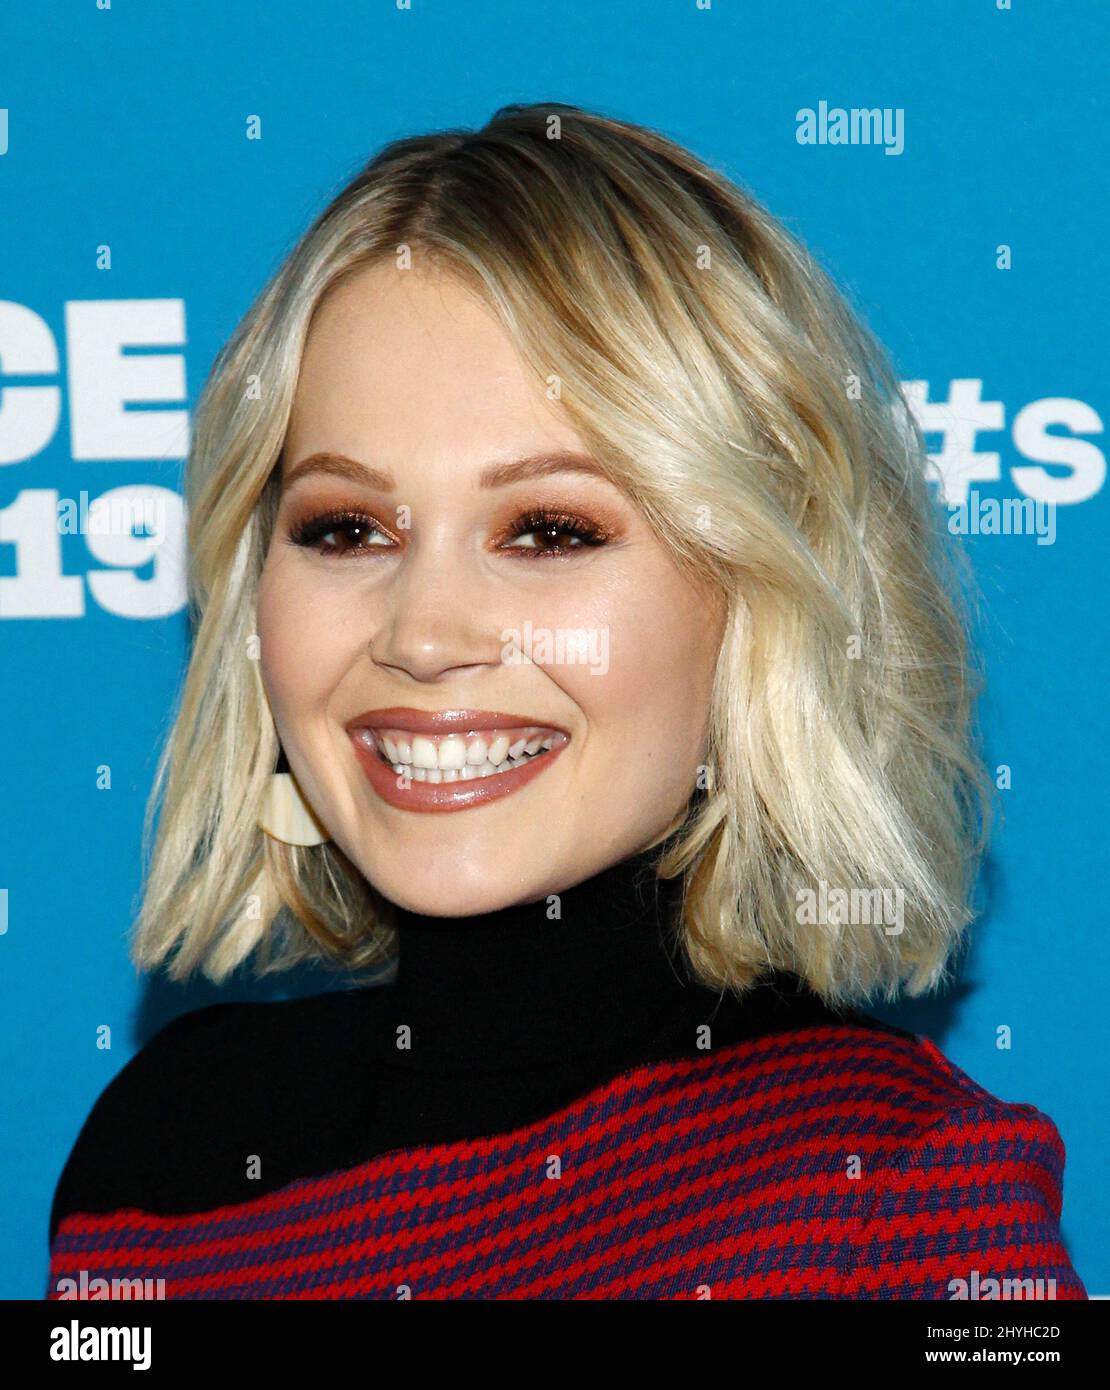 Kelli Berglund at the premiere of 'Now Apocalypse' during the 2019 Sundance Film Festival Stock Photo